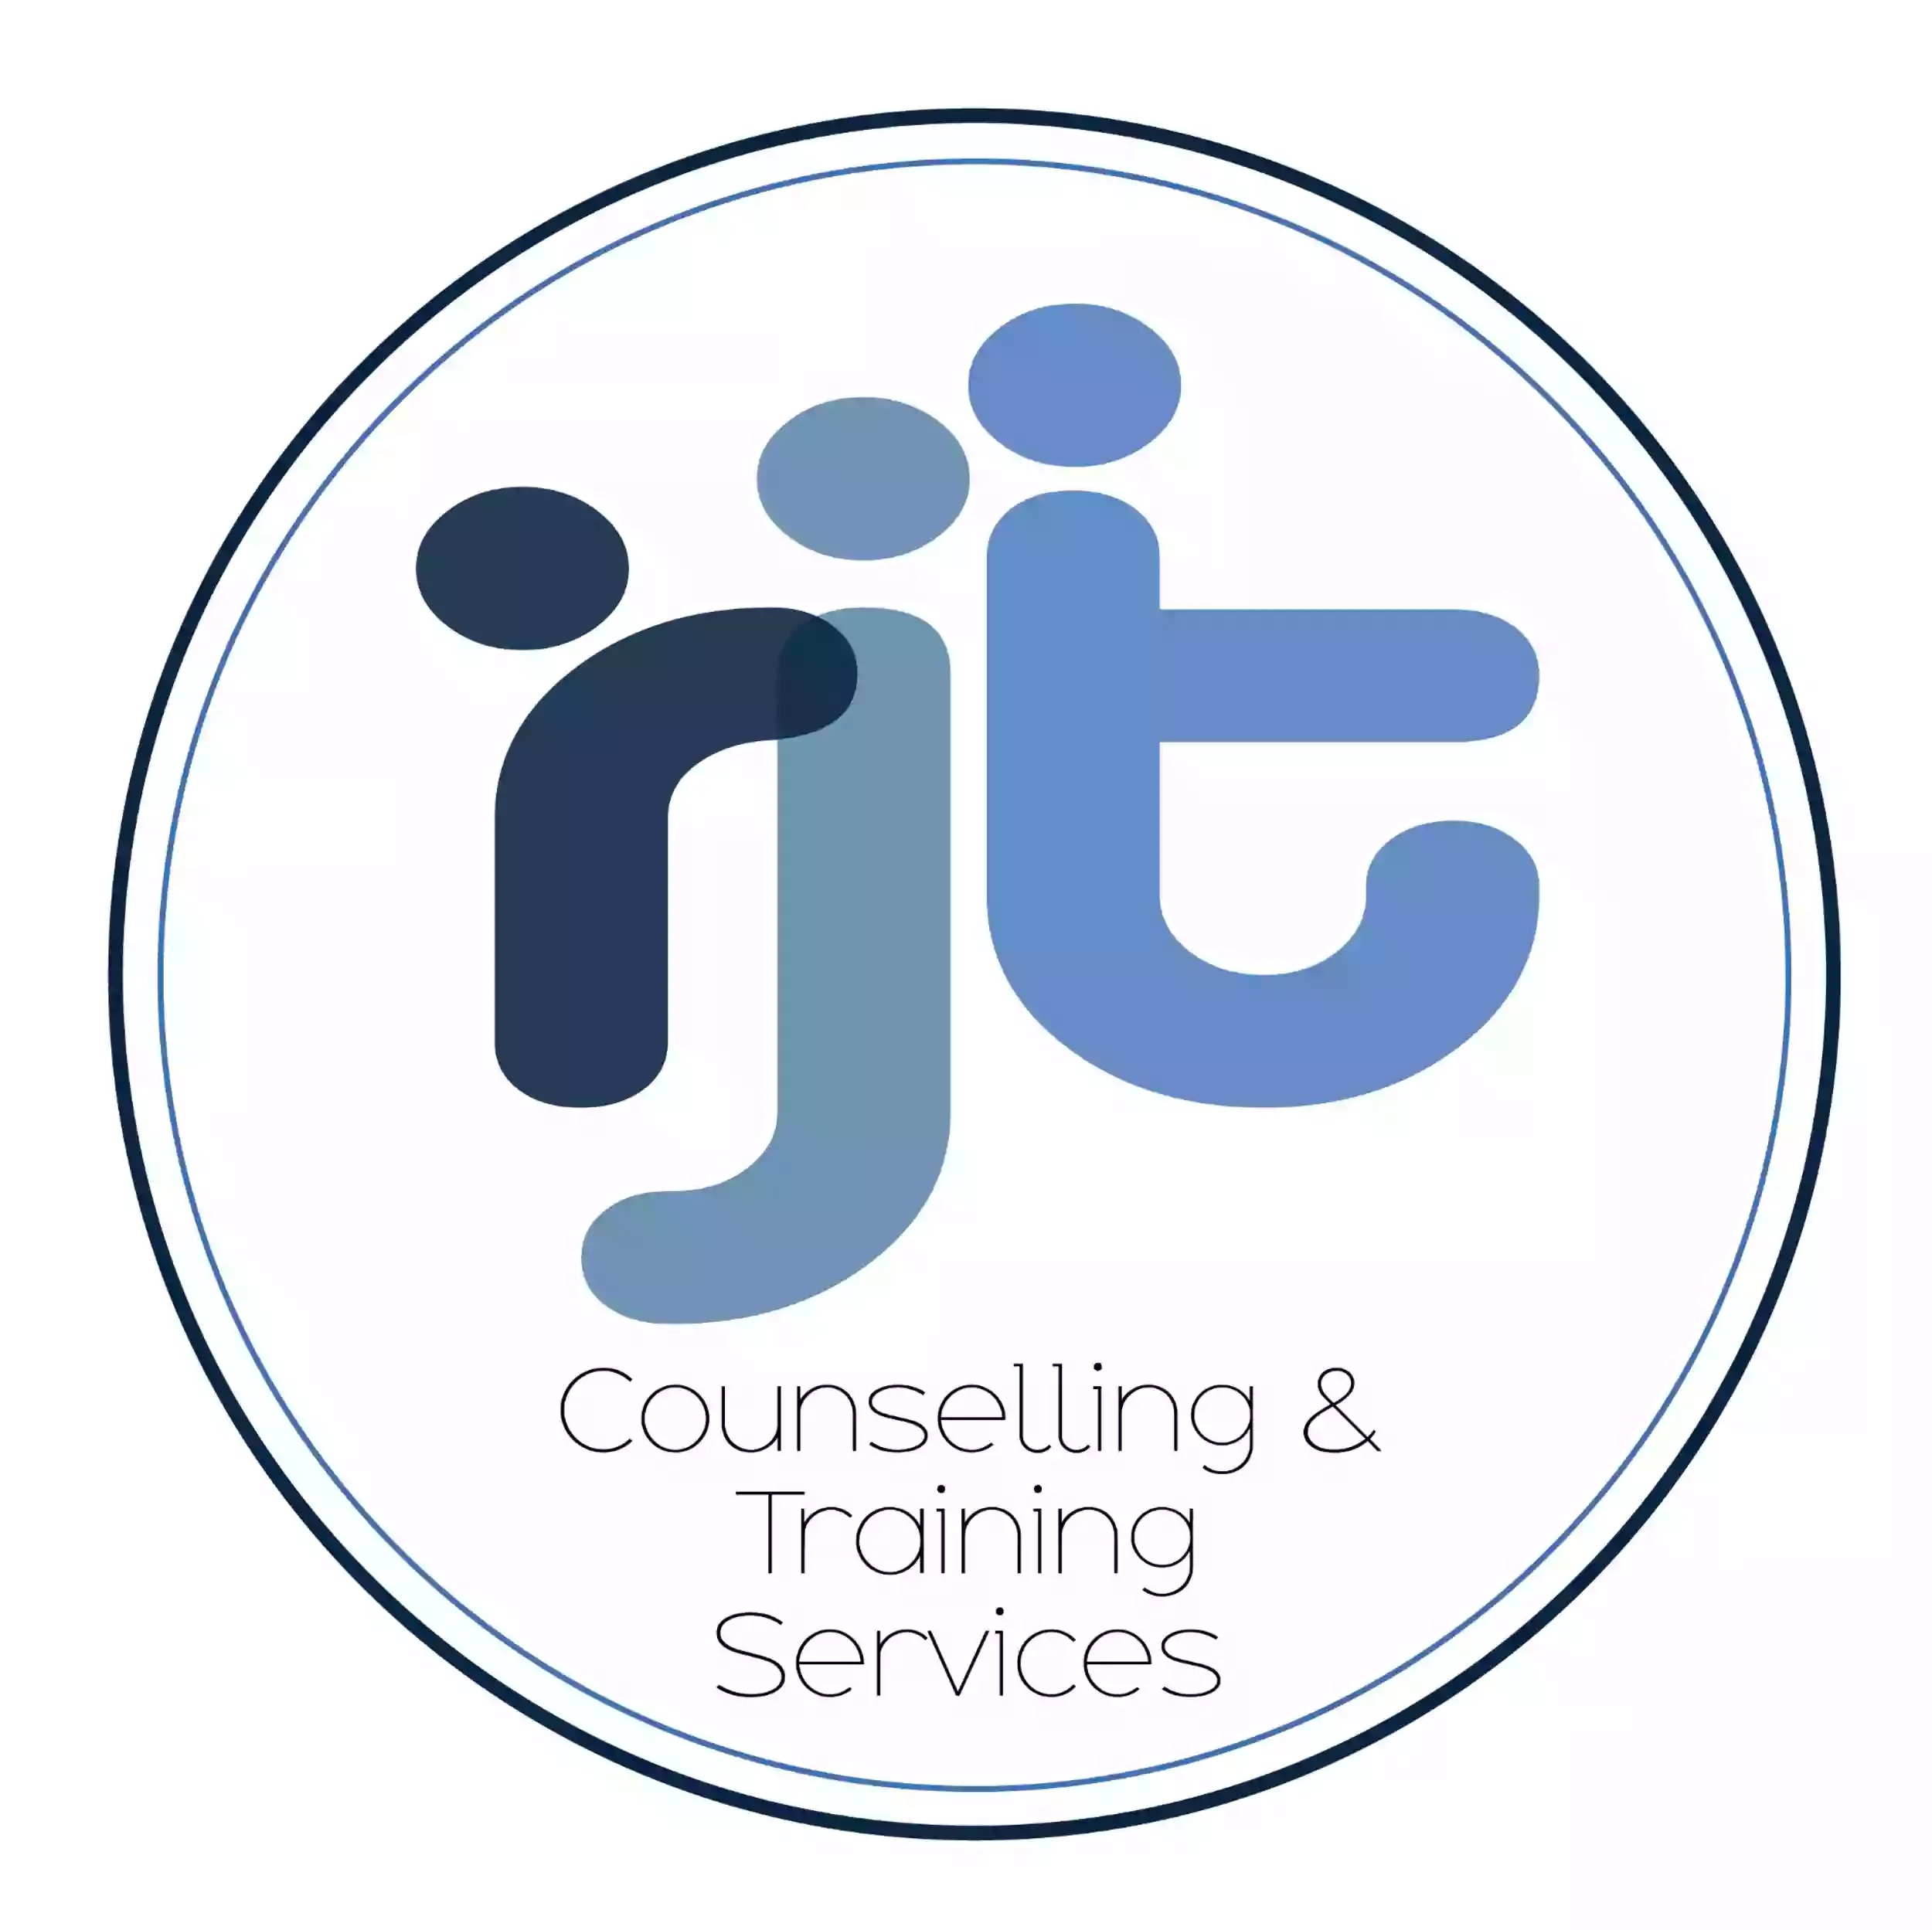 RJT Counselling & Training Services